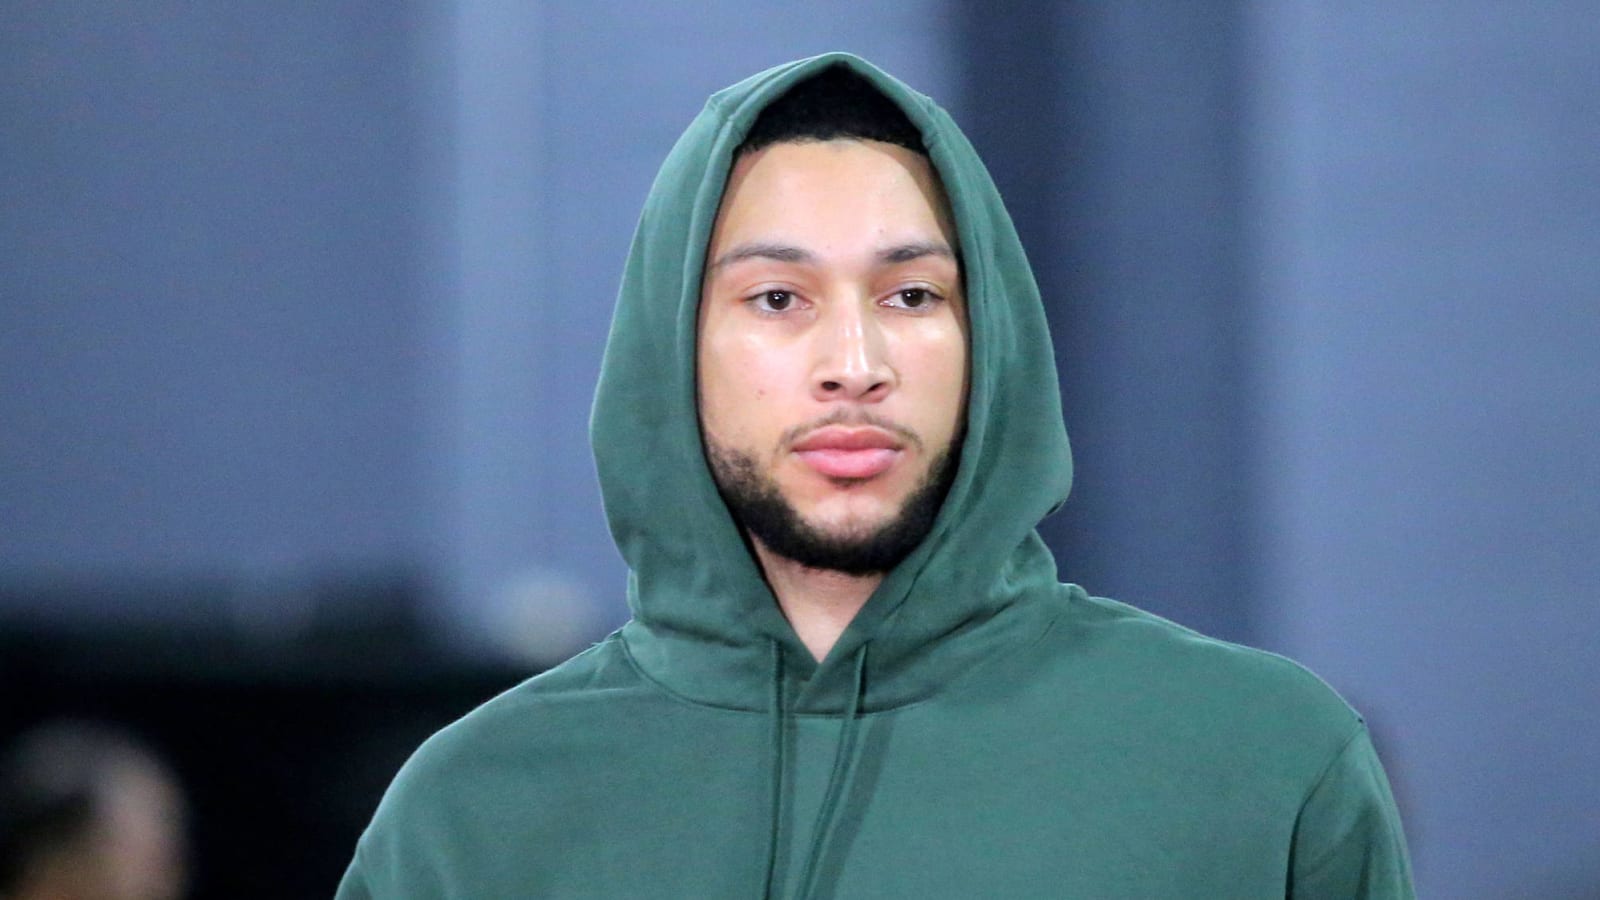 76ers All-Star Ben Simmons 'mentally checked out of Philadelphia'?